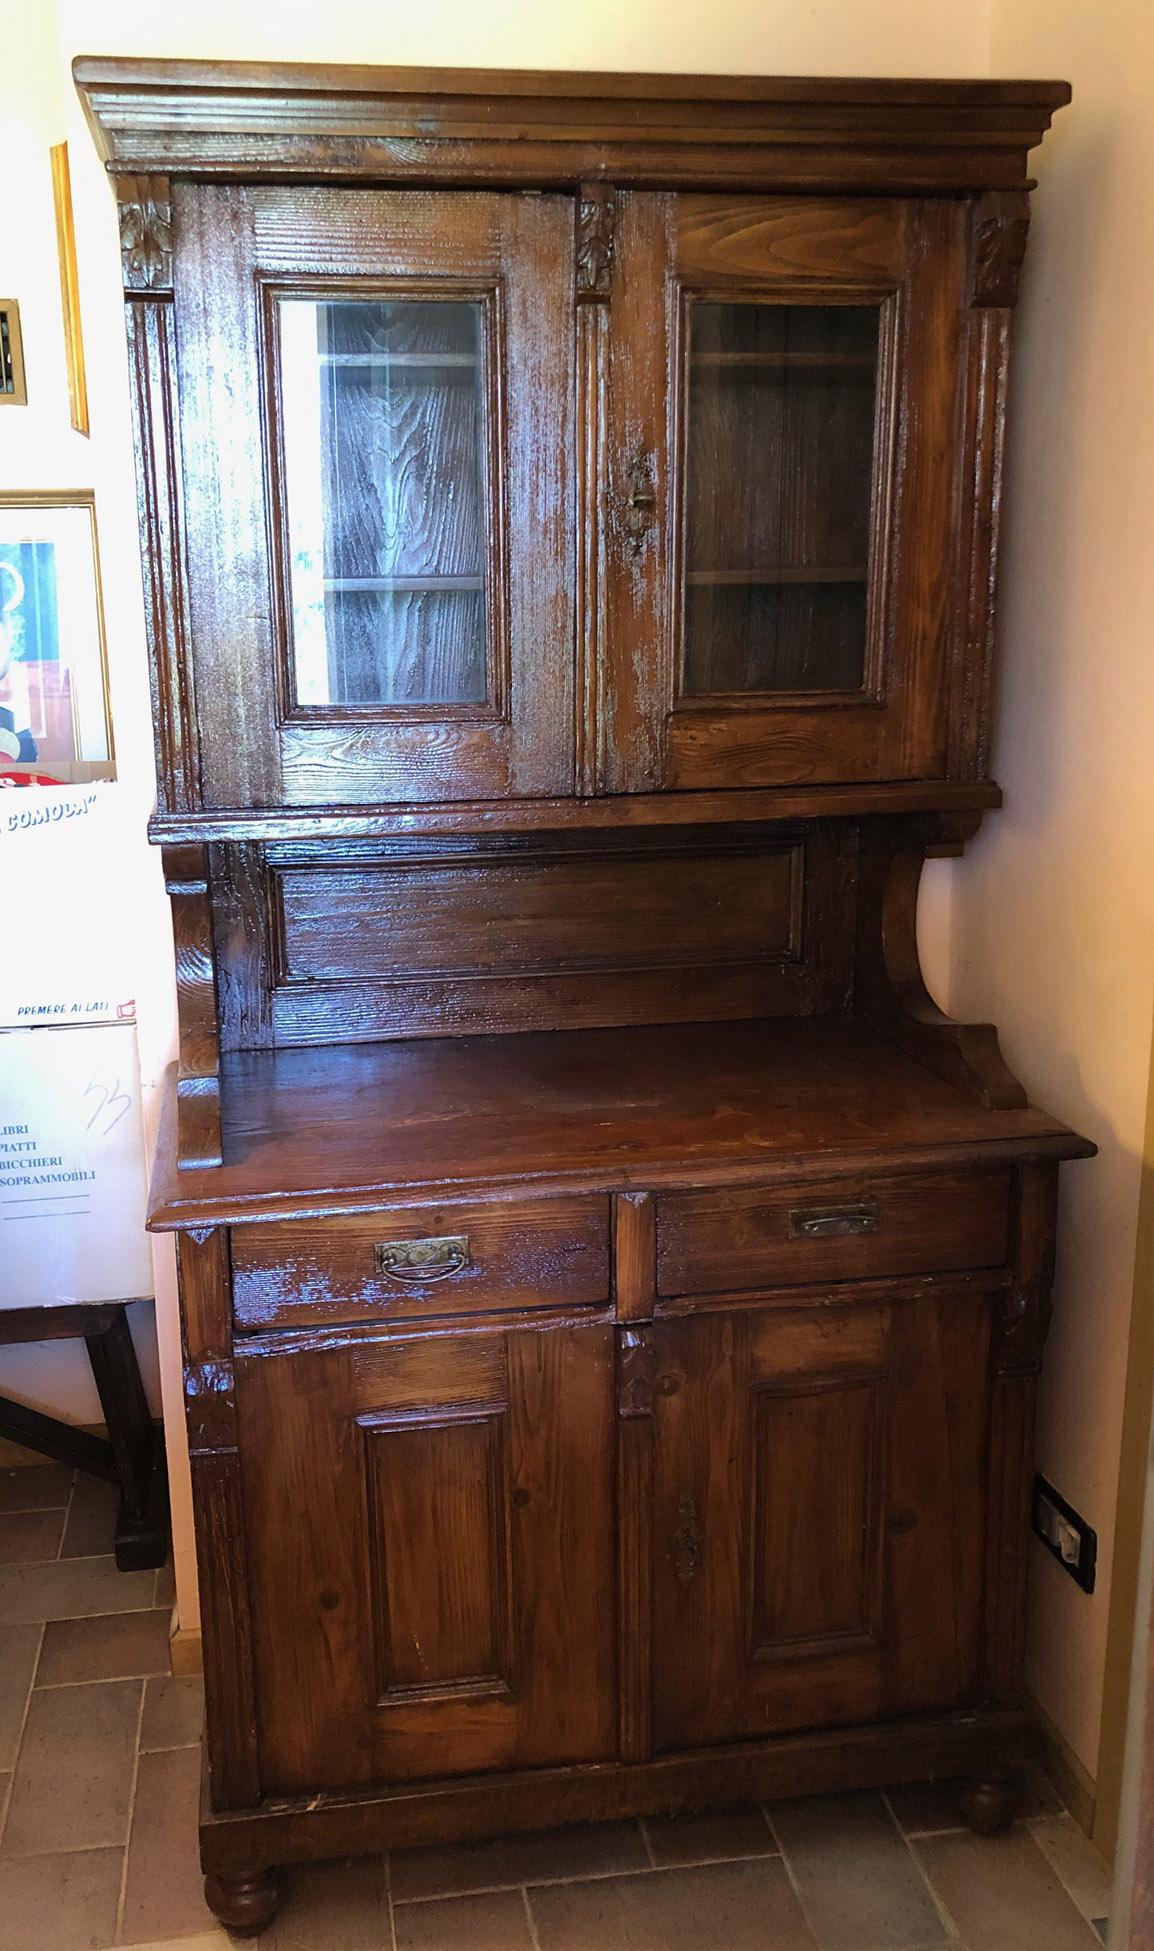 Typical Tuscan showcase, rustic Italian, in fir, consisting of base and riser. Honey color.
In ancient times the piece of furniture had been painted green and about 30 years ago it was sandblasted to bring back the color of the natural wood.
It is